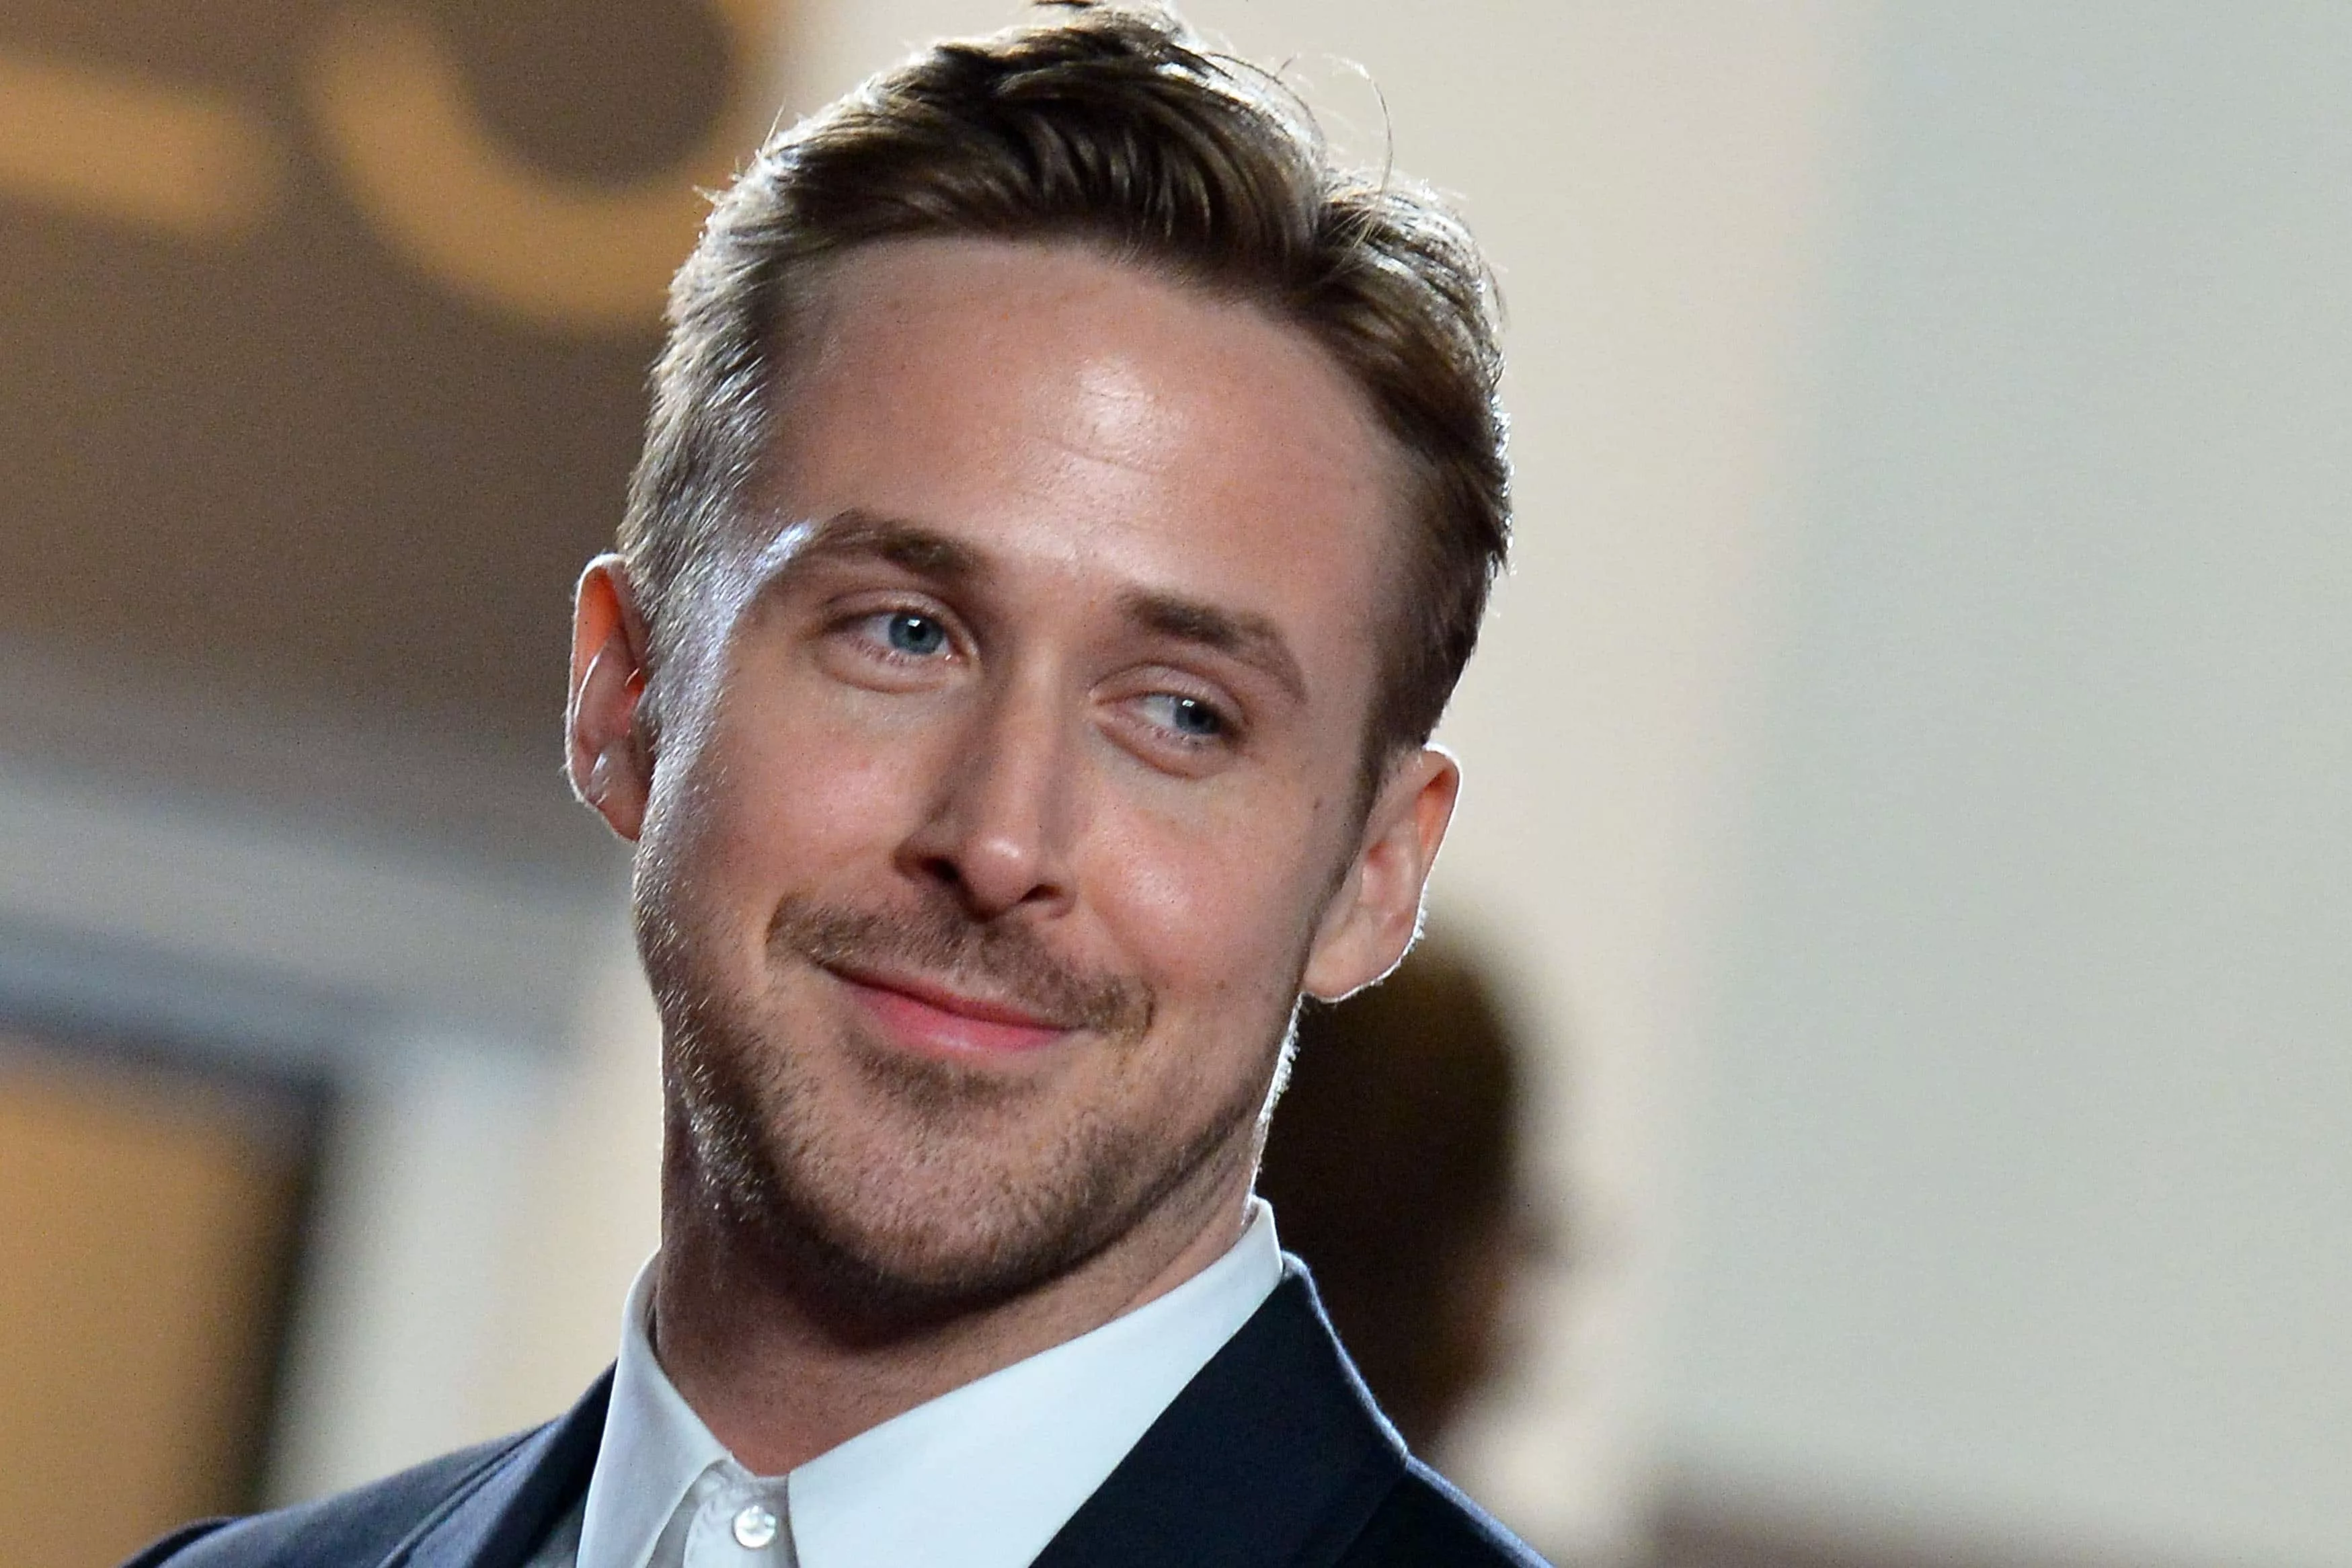 Watch Online |  Ryan Gosling Naked Photos – Full Collection Exposed!